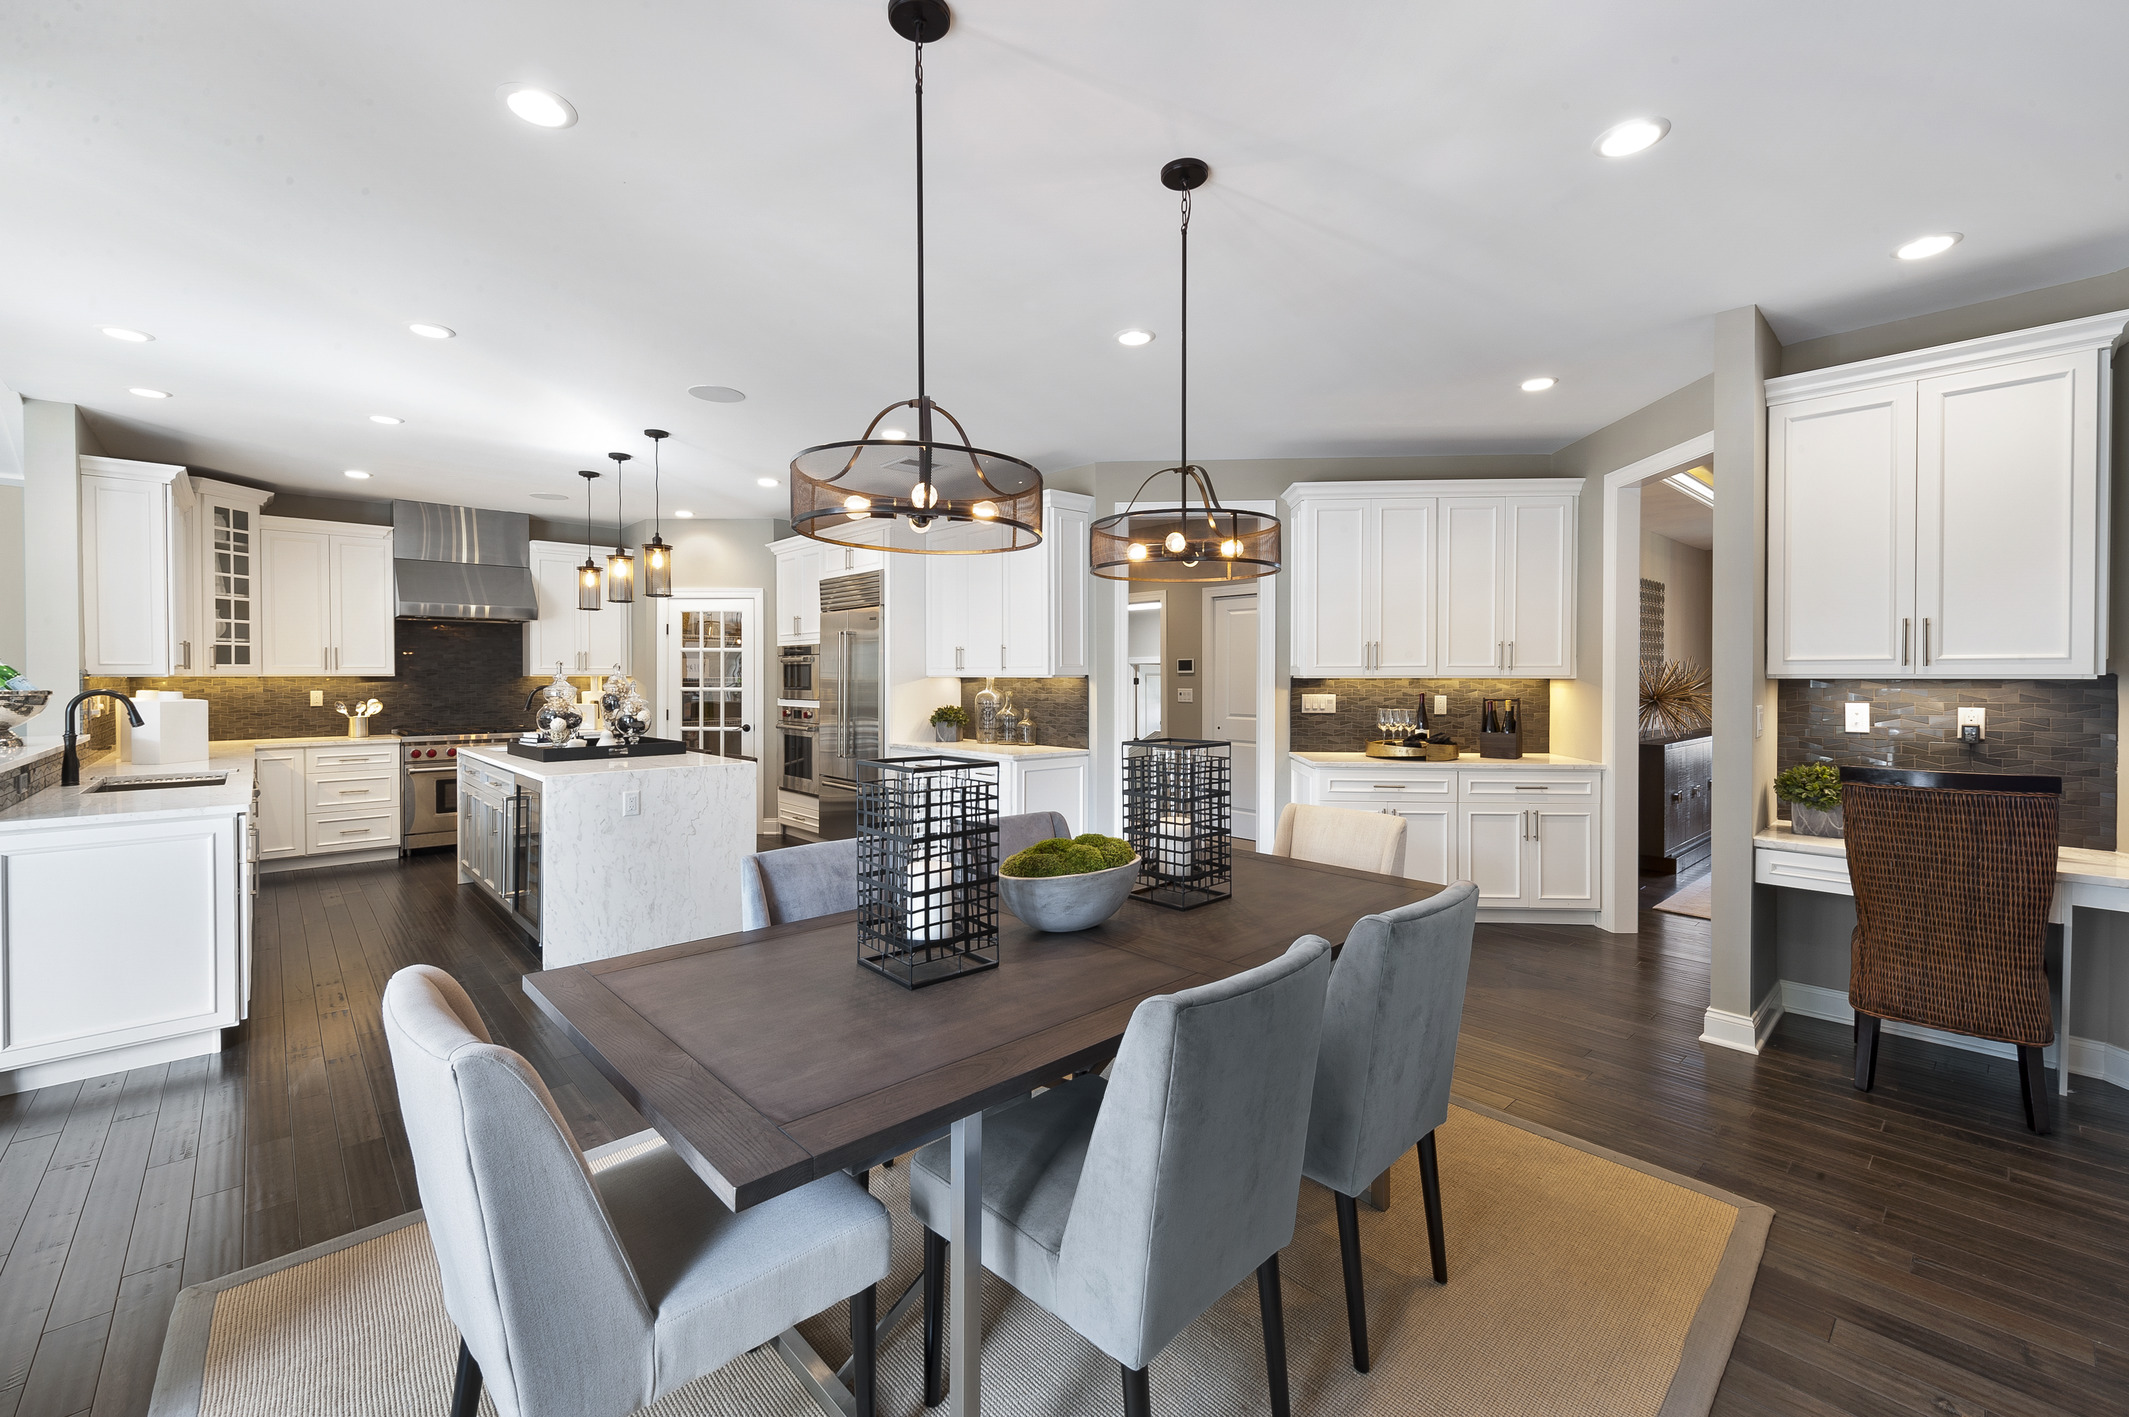 Dining space highlighted by matching pendant fixtures.